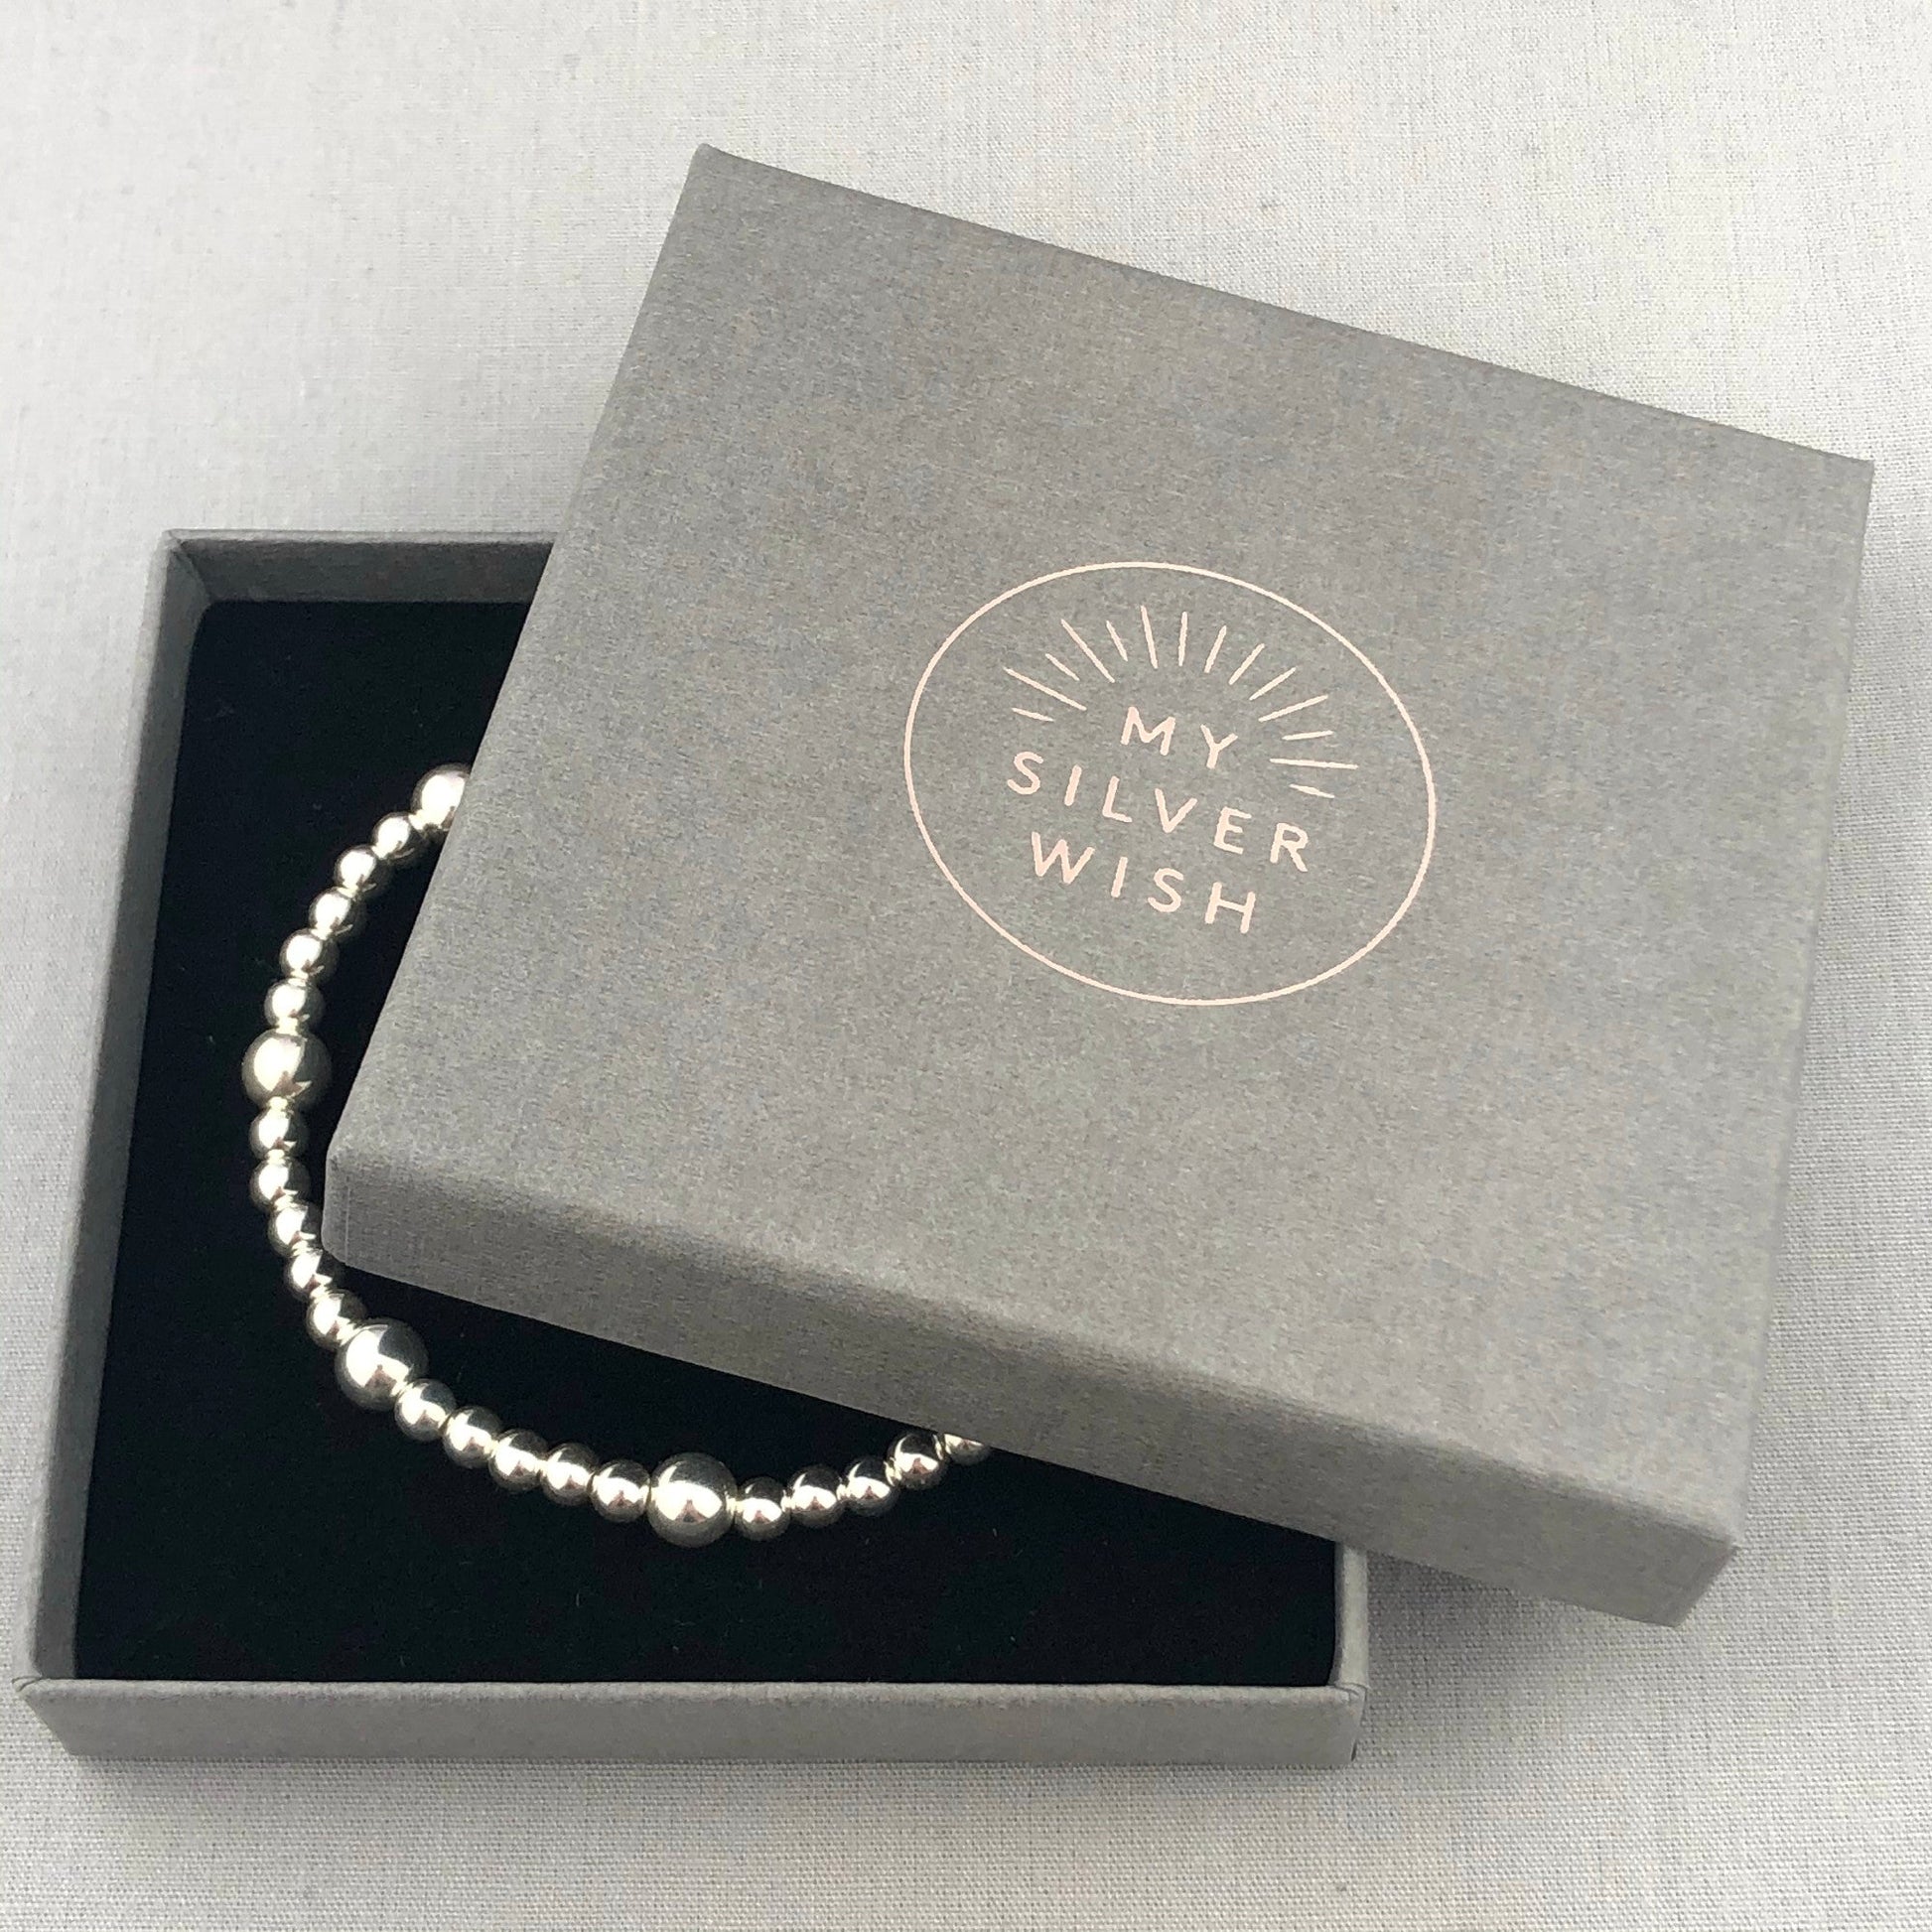 My Silver Wish Gift Box with Silver Stacking Charm Bracelet inside